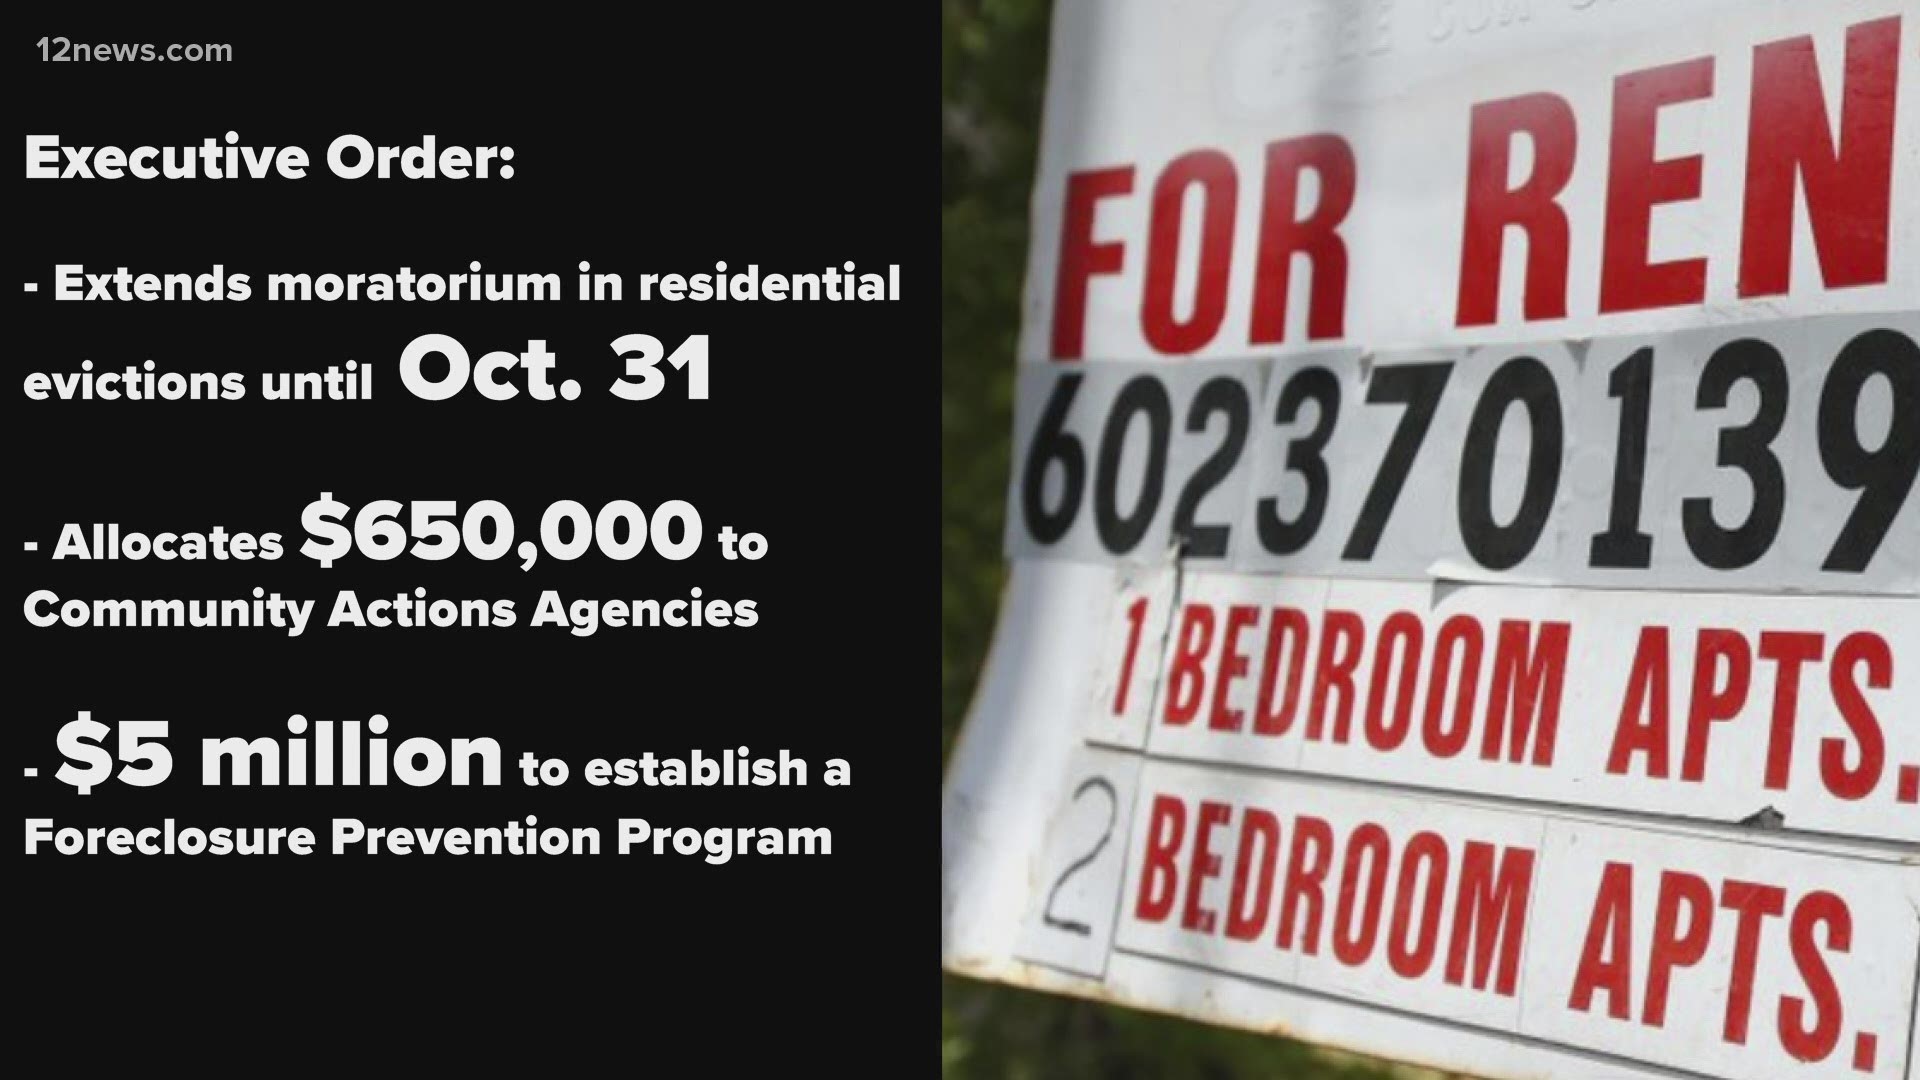 The hold on evictions has been extending through the end of October along with proving $650,000 for staffing and rental assistance programs for families in need.